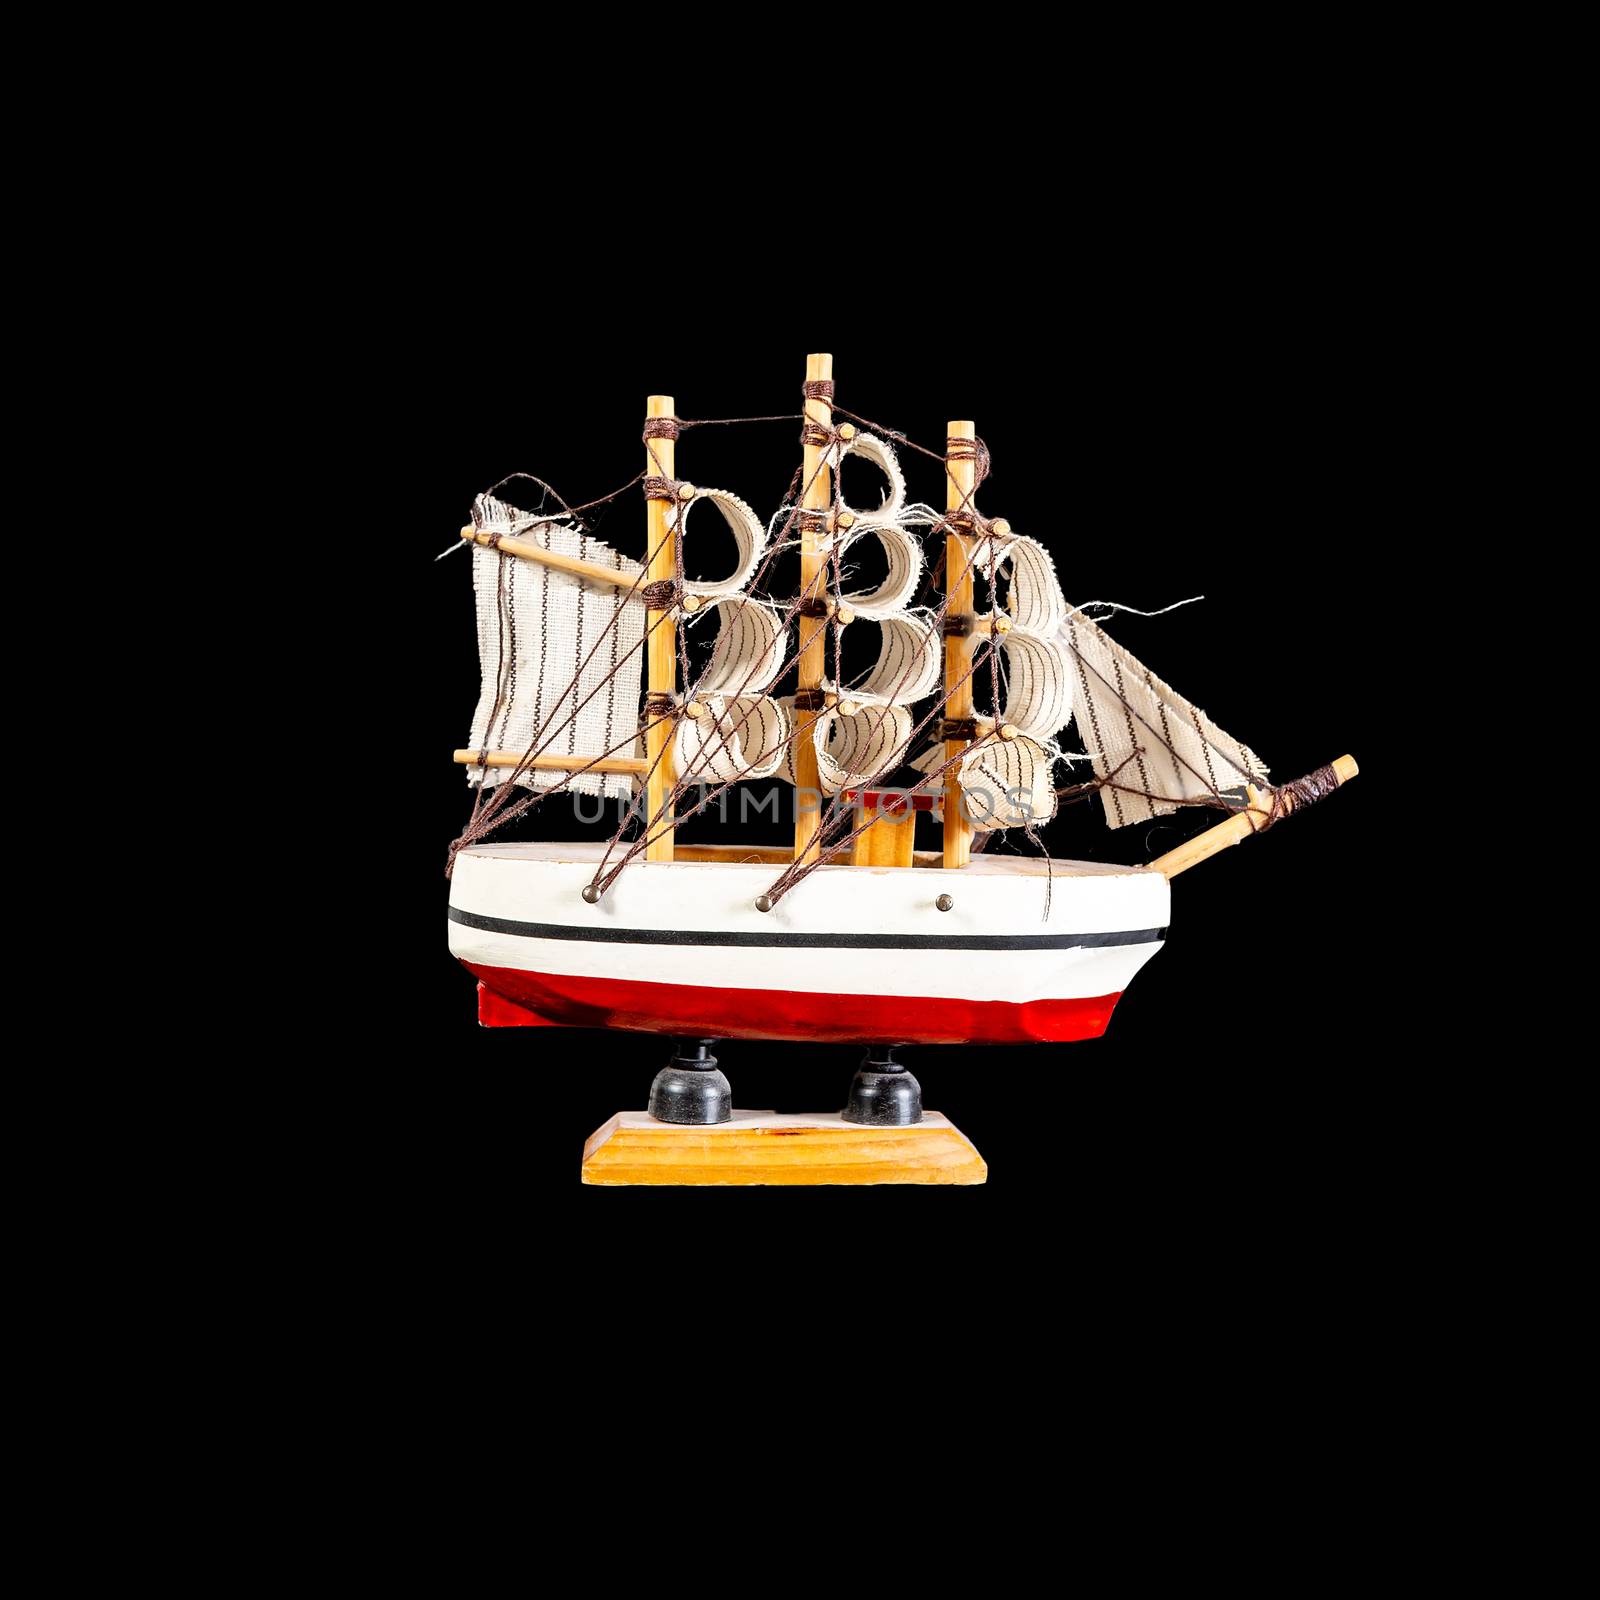 Toy boat sailboat on a wooden stand isolated on a black background. Model of the ship with a red stripe. side view